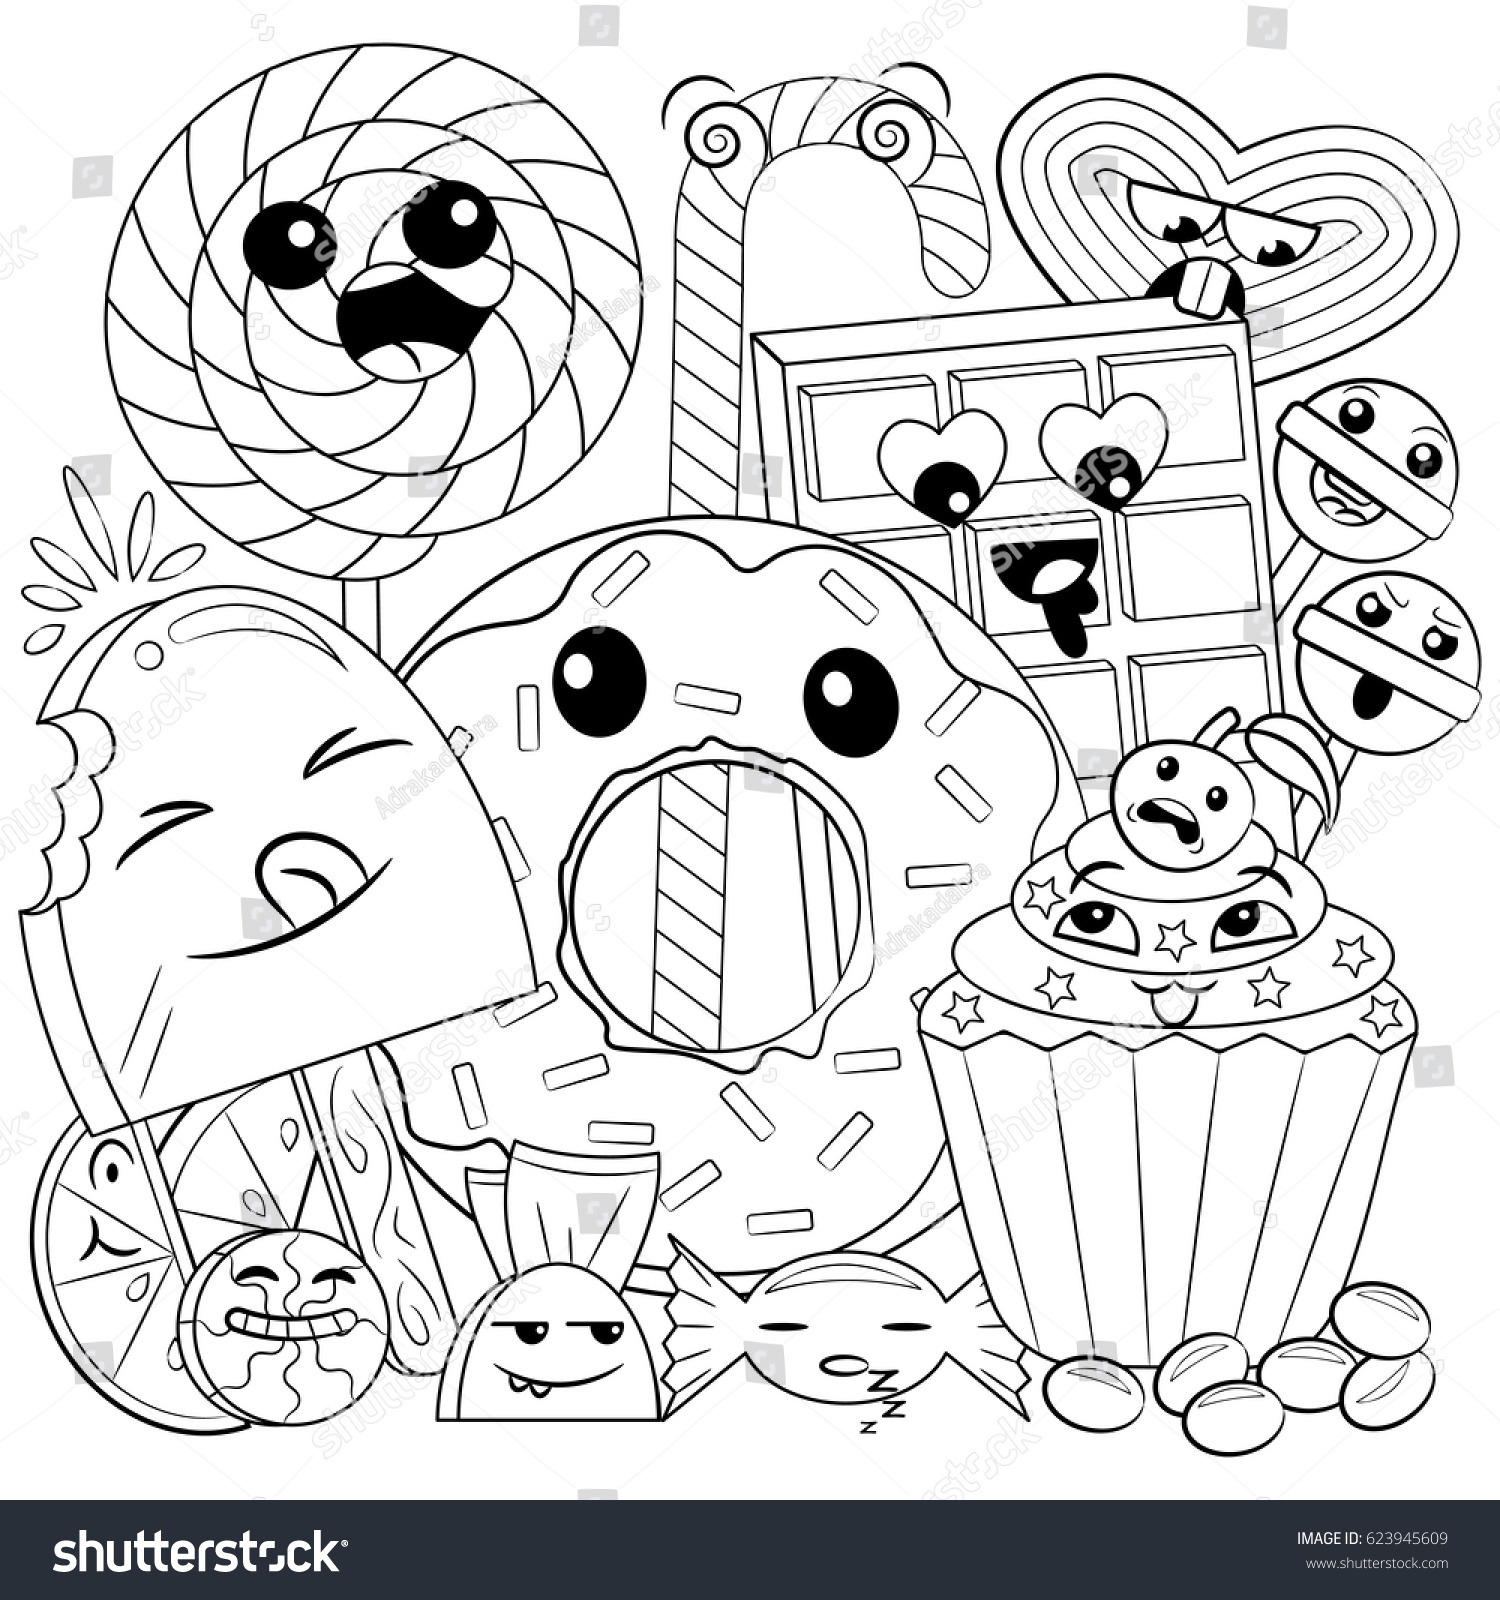 Black White Coloring Page Cute Sweet Stock Vector Royalty Free ...